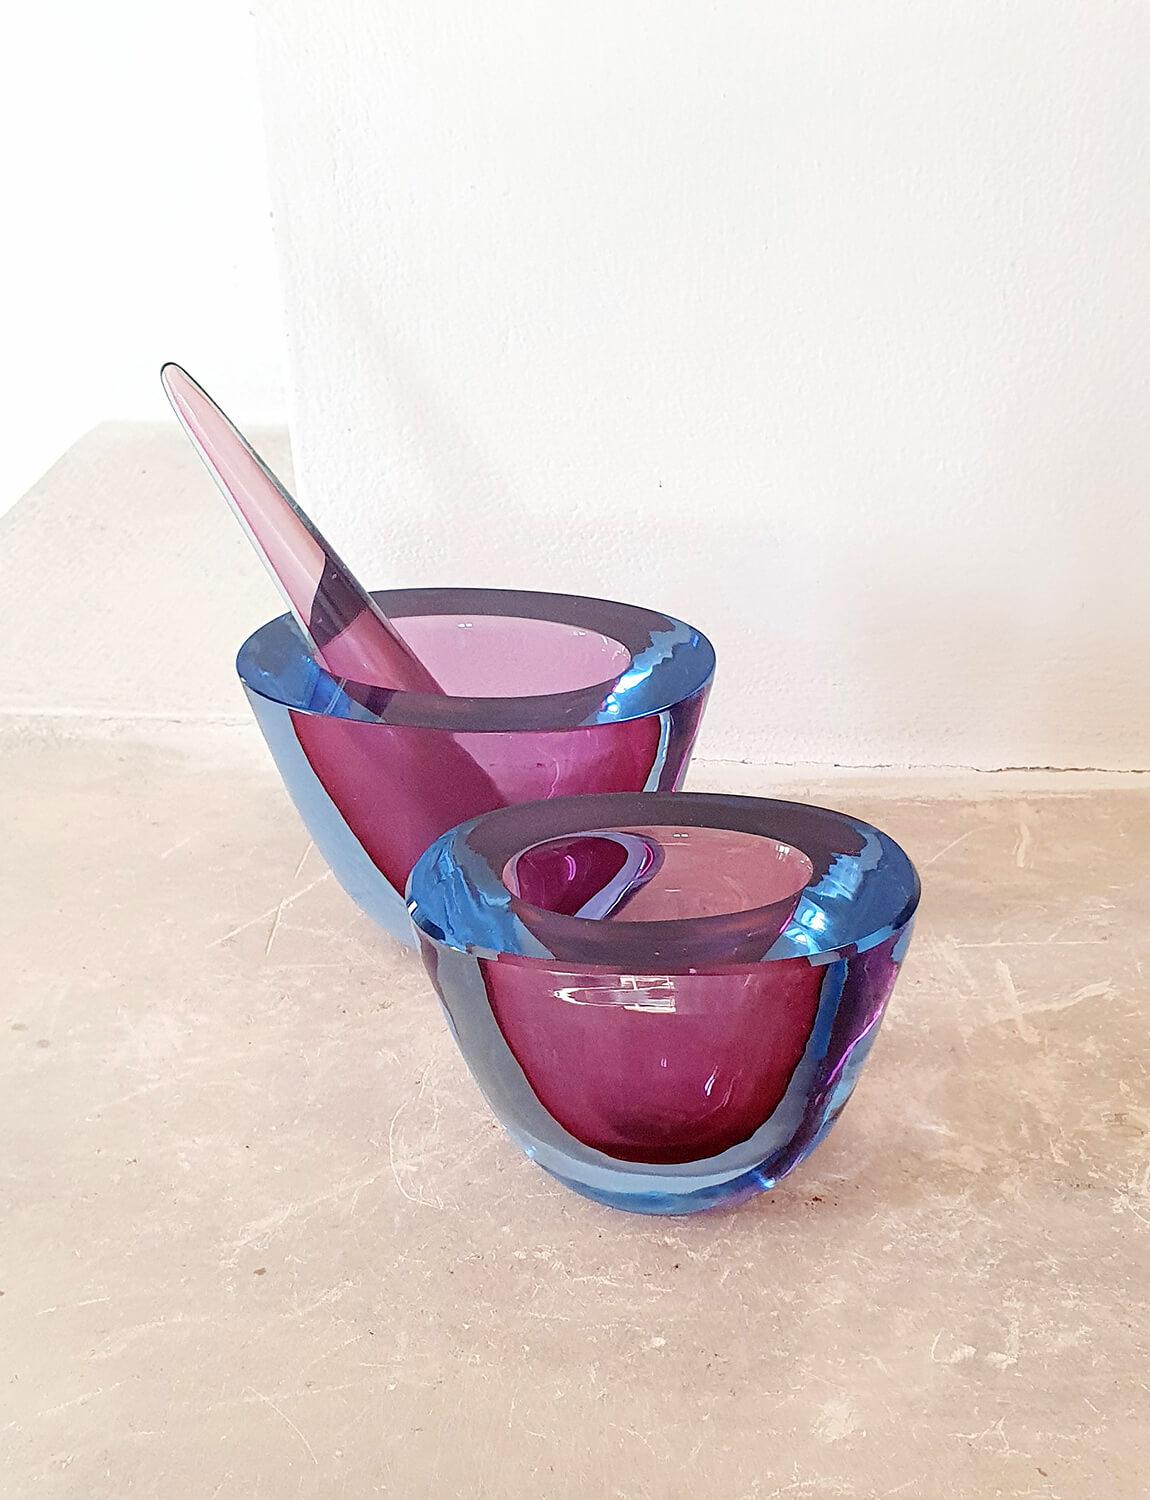 An extraordinarily rare and beautiful find. This pair of glass bowls (or mortars) are hand-blown 1960s Murano glass by Flavio Poli with a deep inner pink core and pale blue surround. They have their original pestle still intact and make for